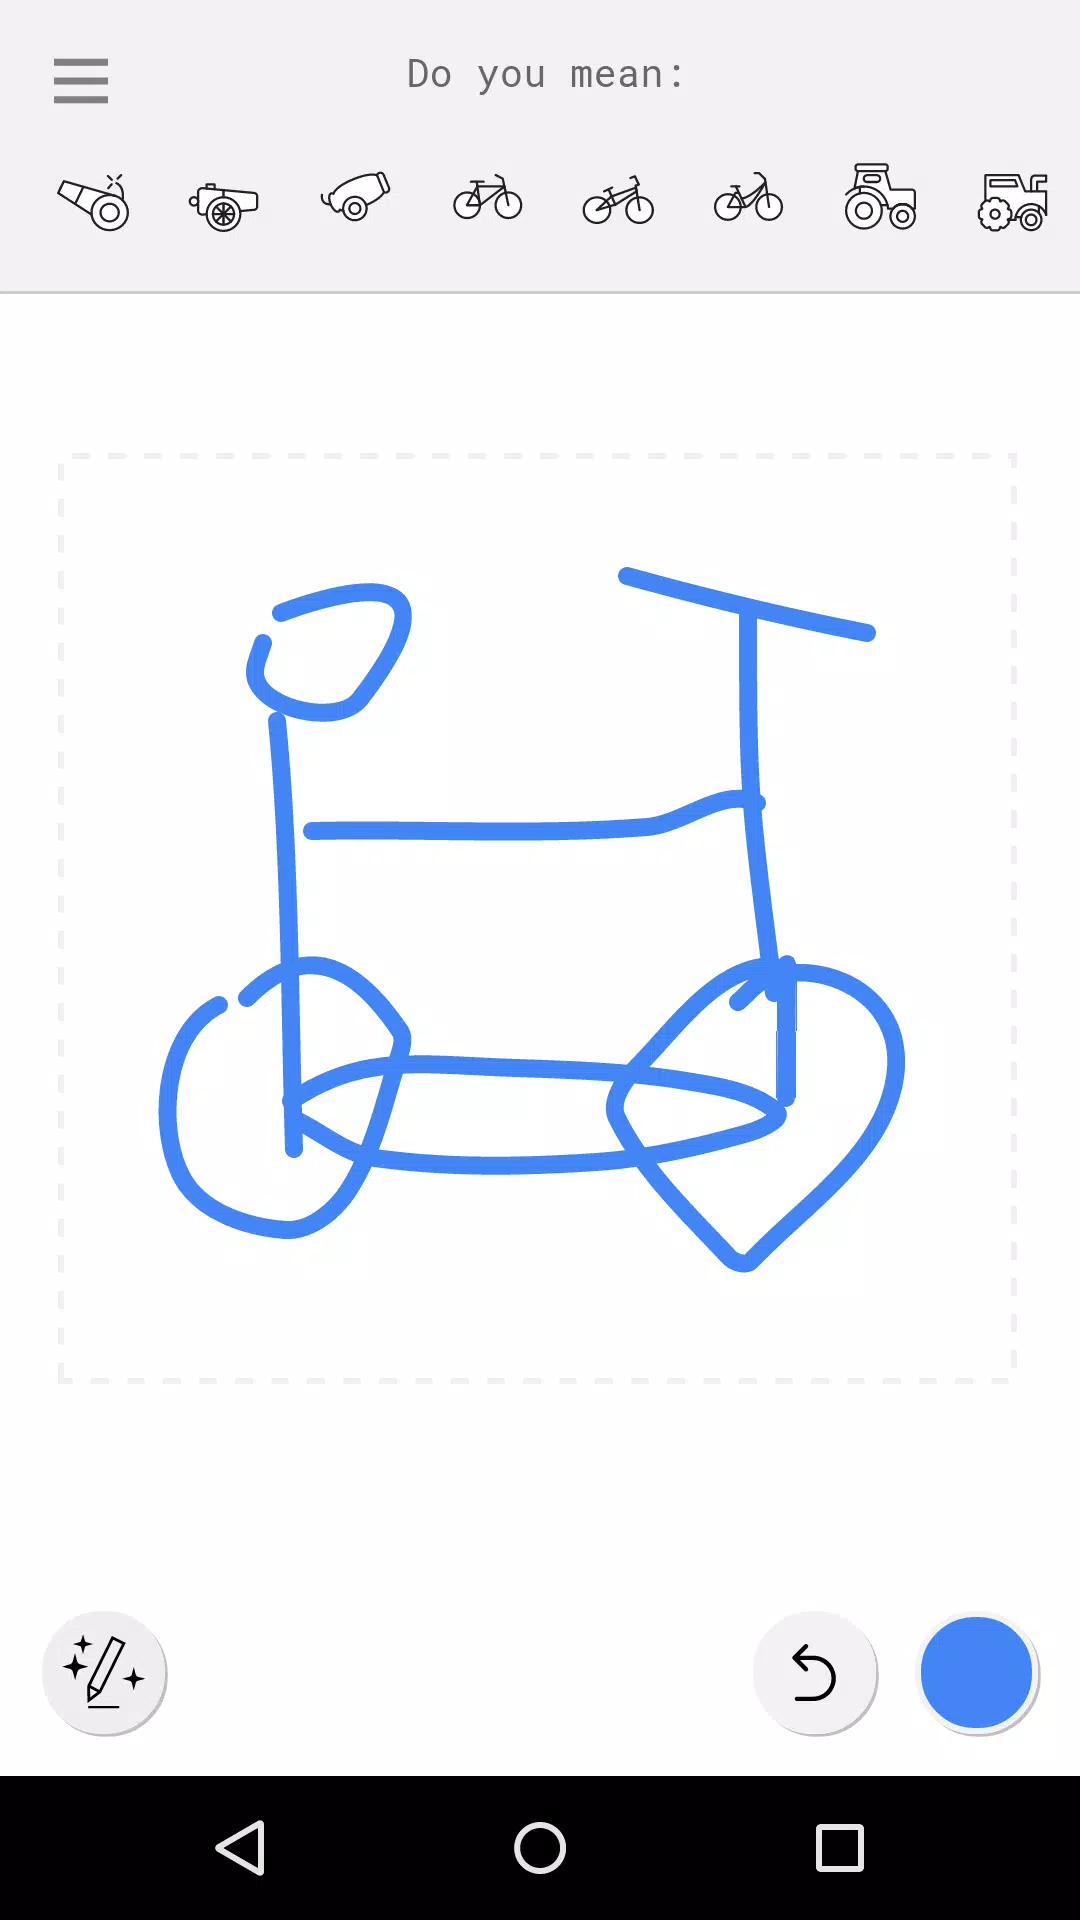 AutoDraw APK (Android App) - Free Download